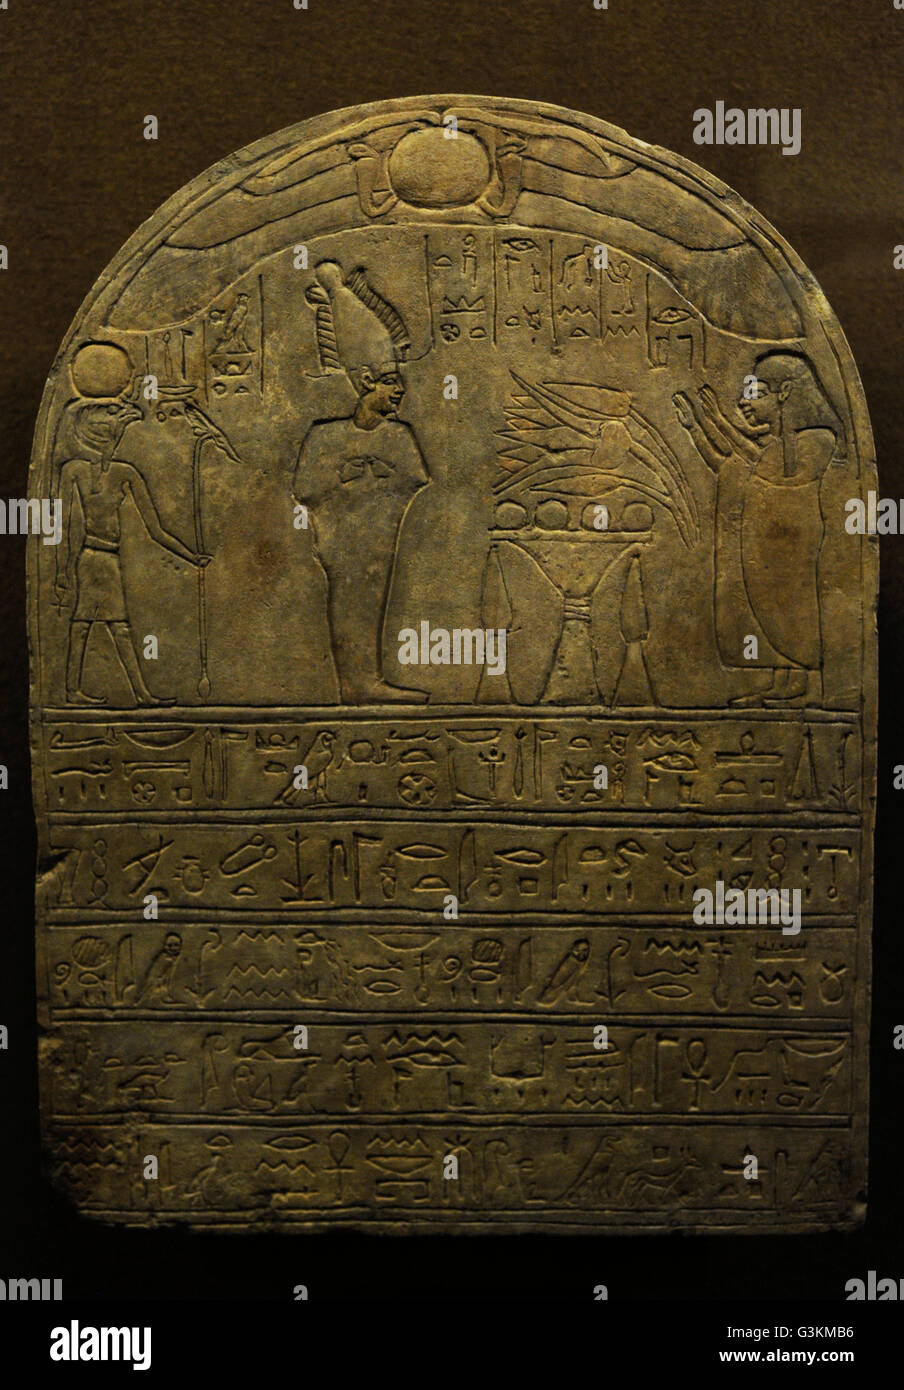 Egypt. Stela of Tanit-Jade. Deceased making offerings to the god Osiris, takes charge of the judgment of the dead. The State Hermitage Museum. St. Petersburg. Russia. Stock Photo